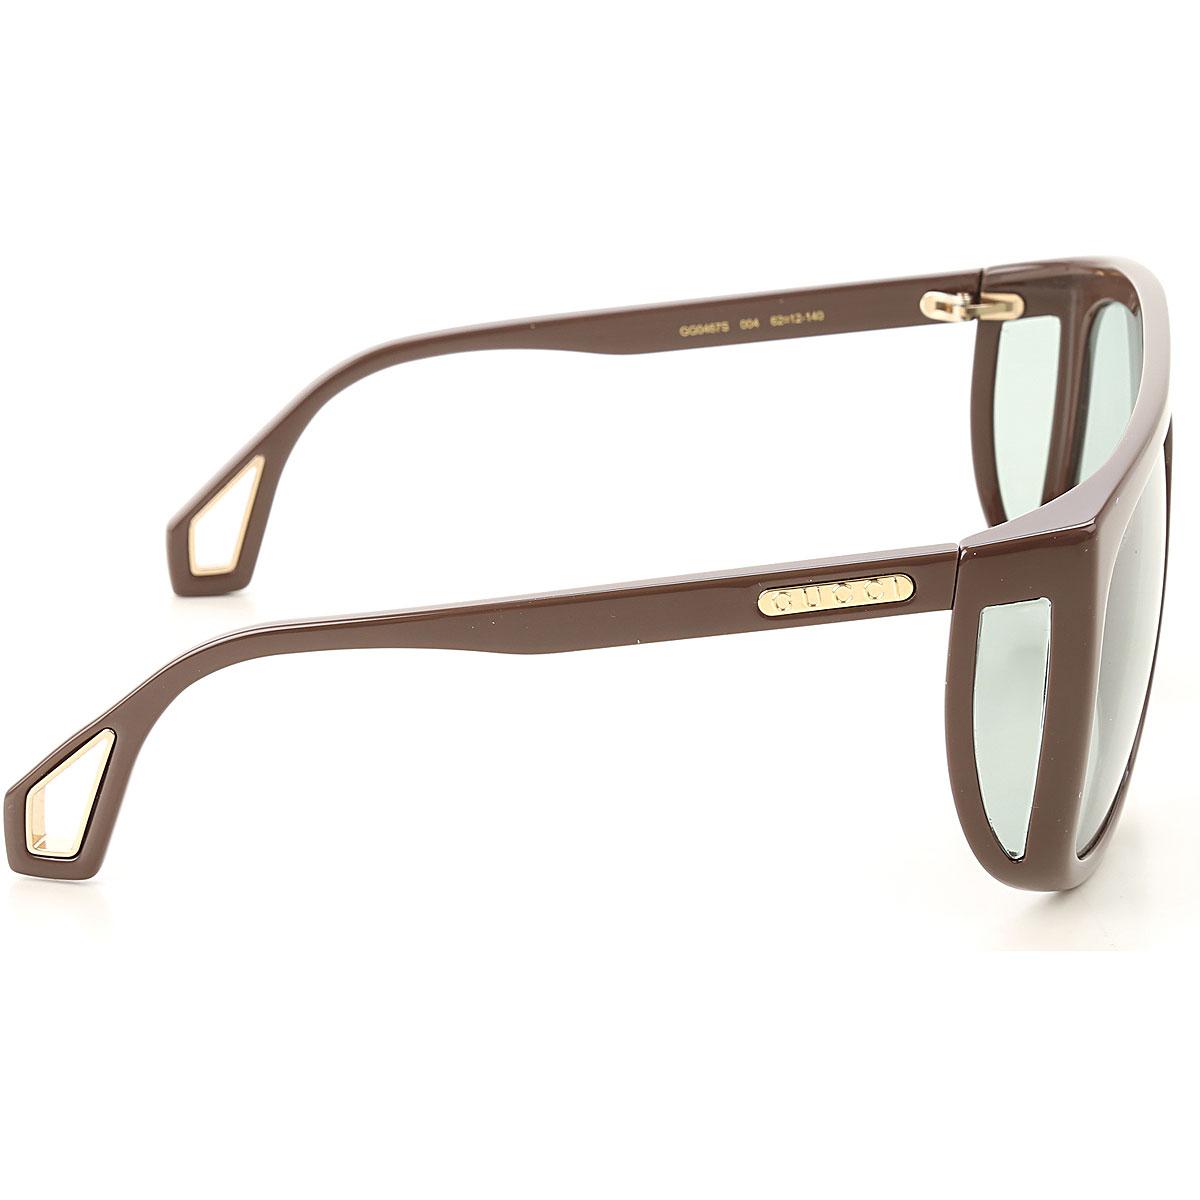 Gucci Sunglasses On Sale in Brown for Men - Lyst